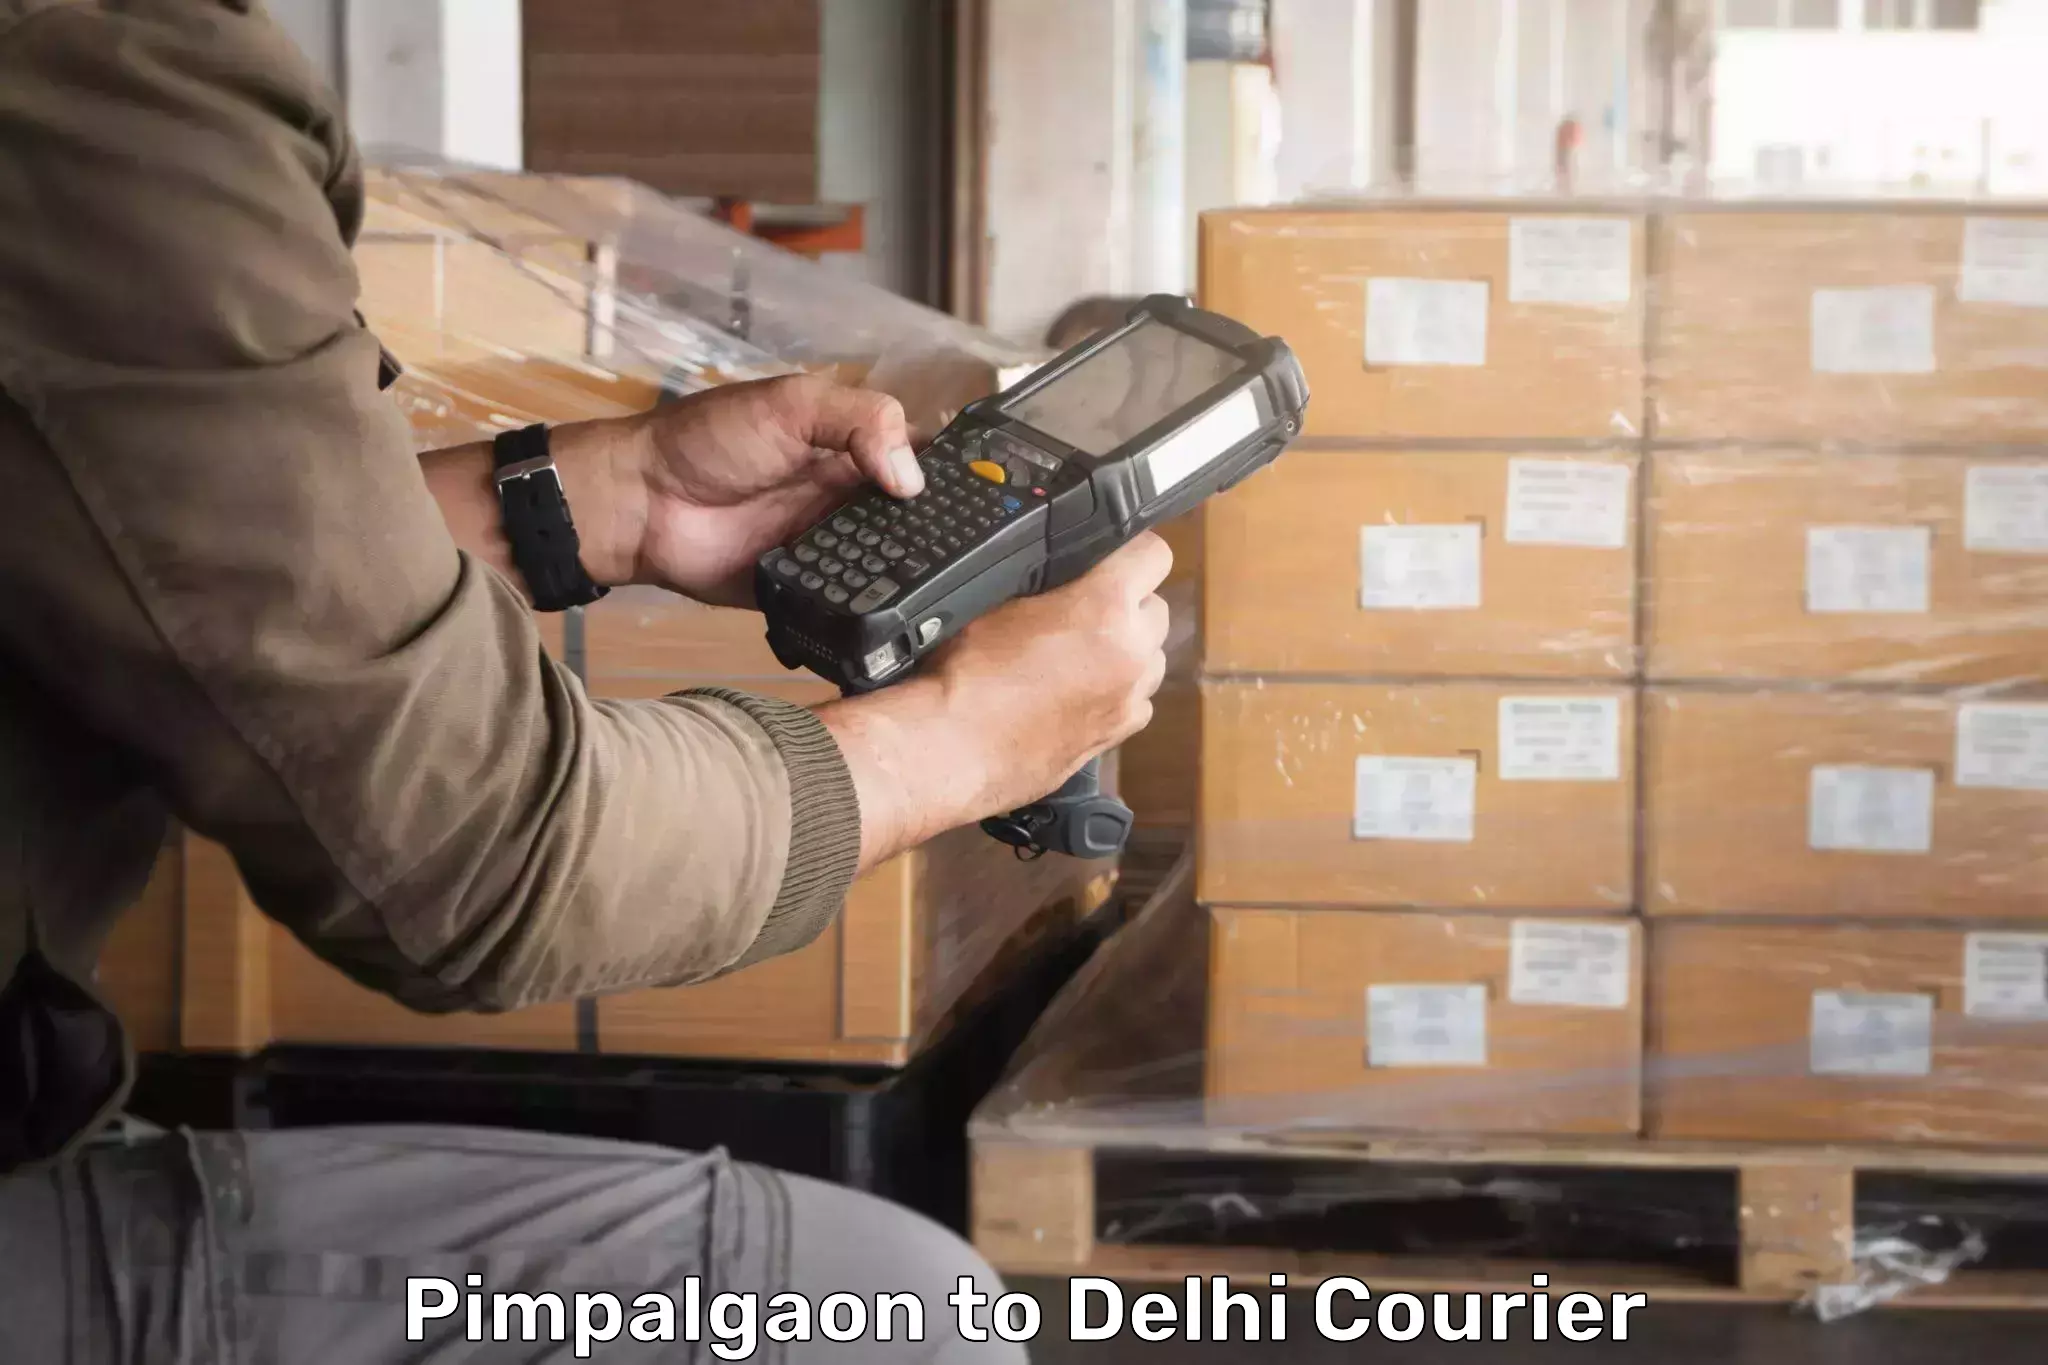 Express delivery network Pimpalgaon to Lodhi Road